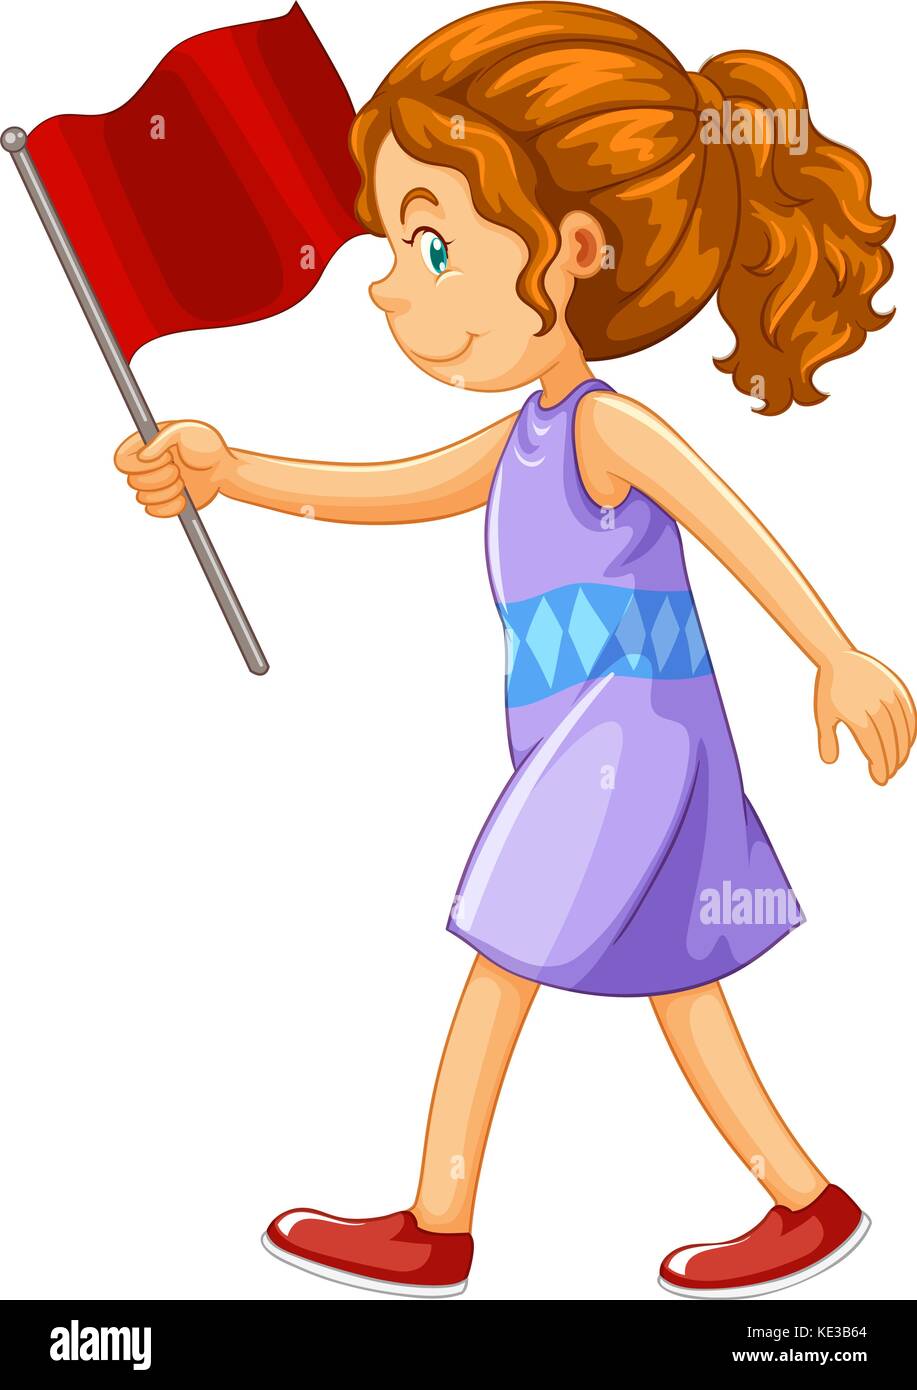 Woman holding red flag illustration Stock Vector